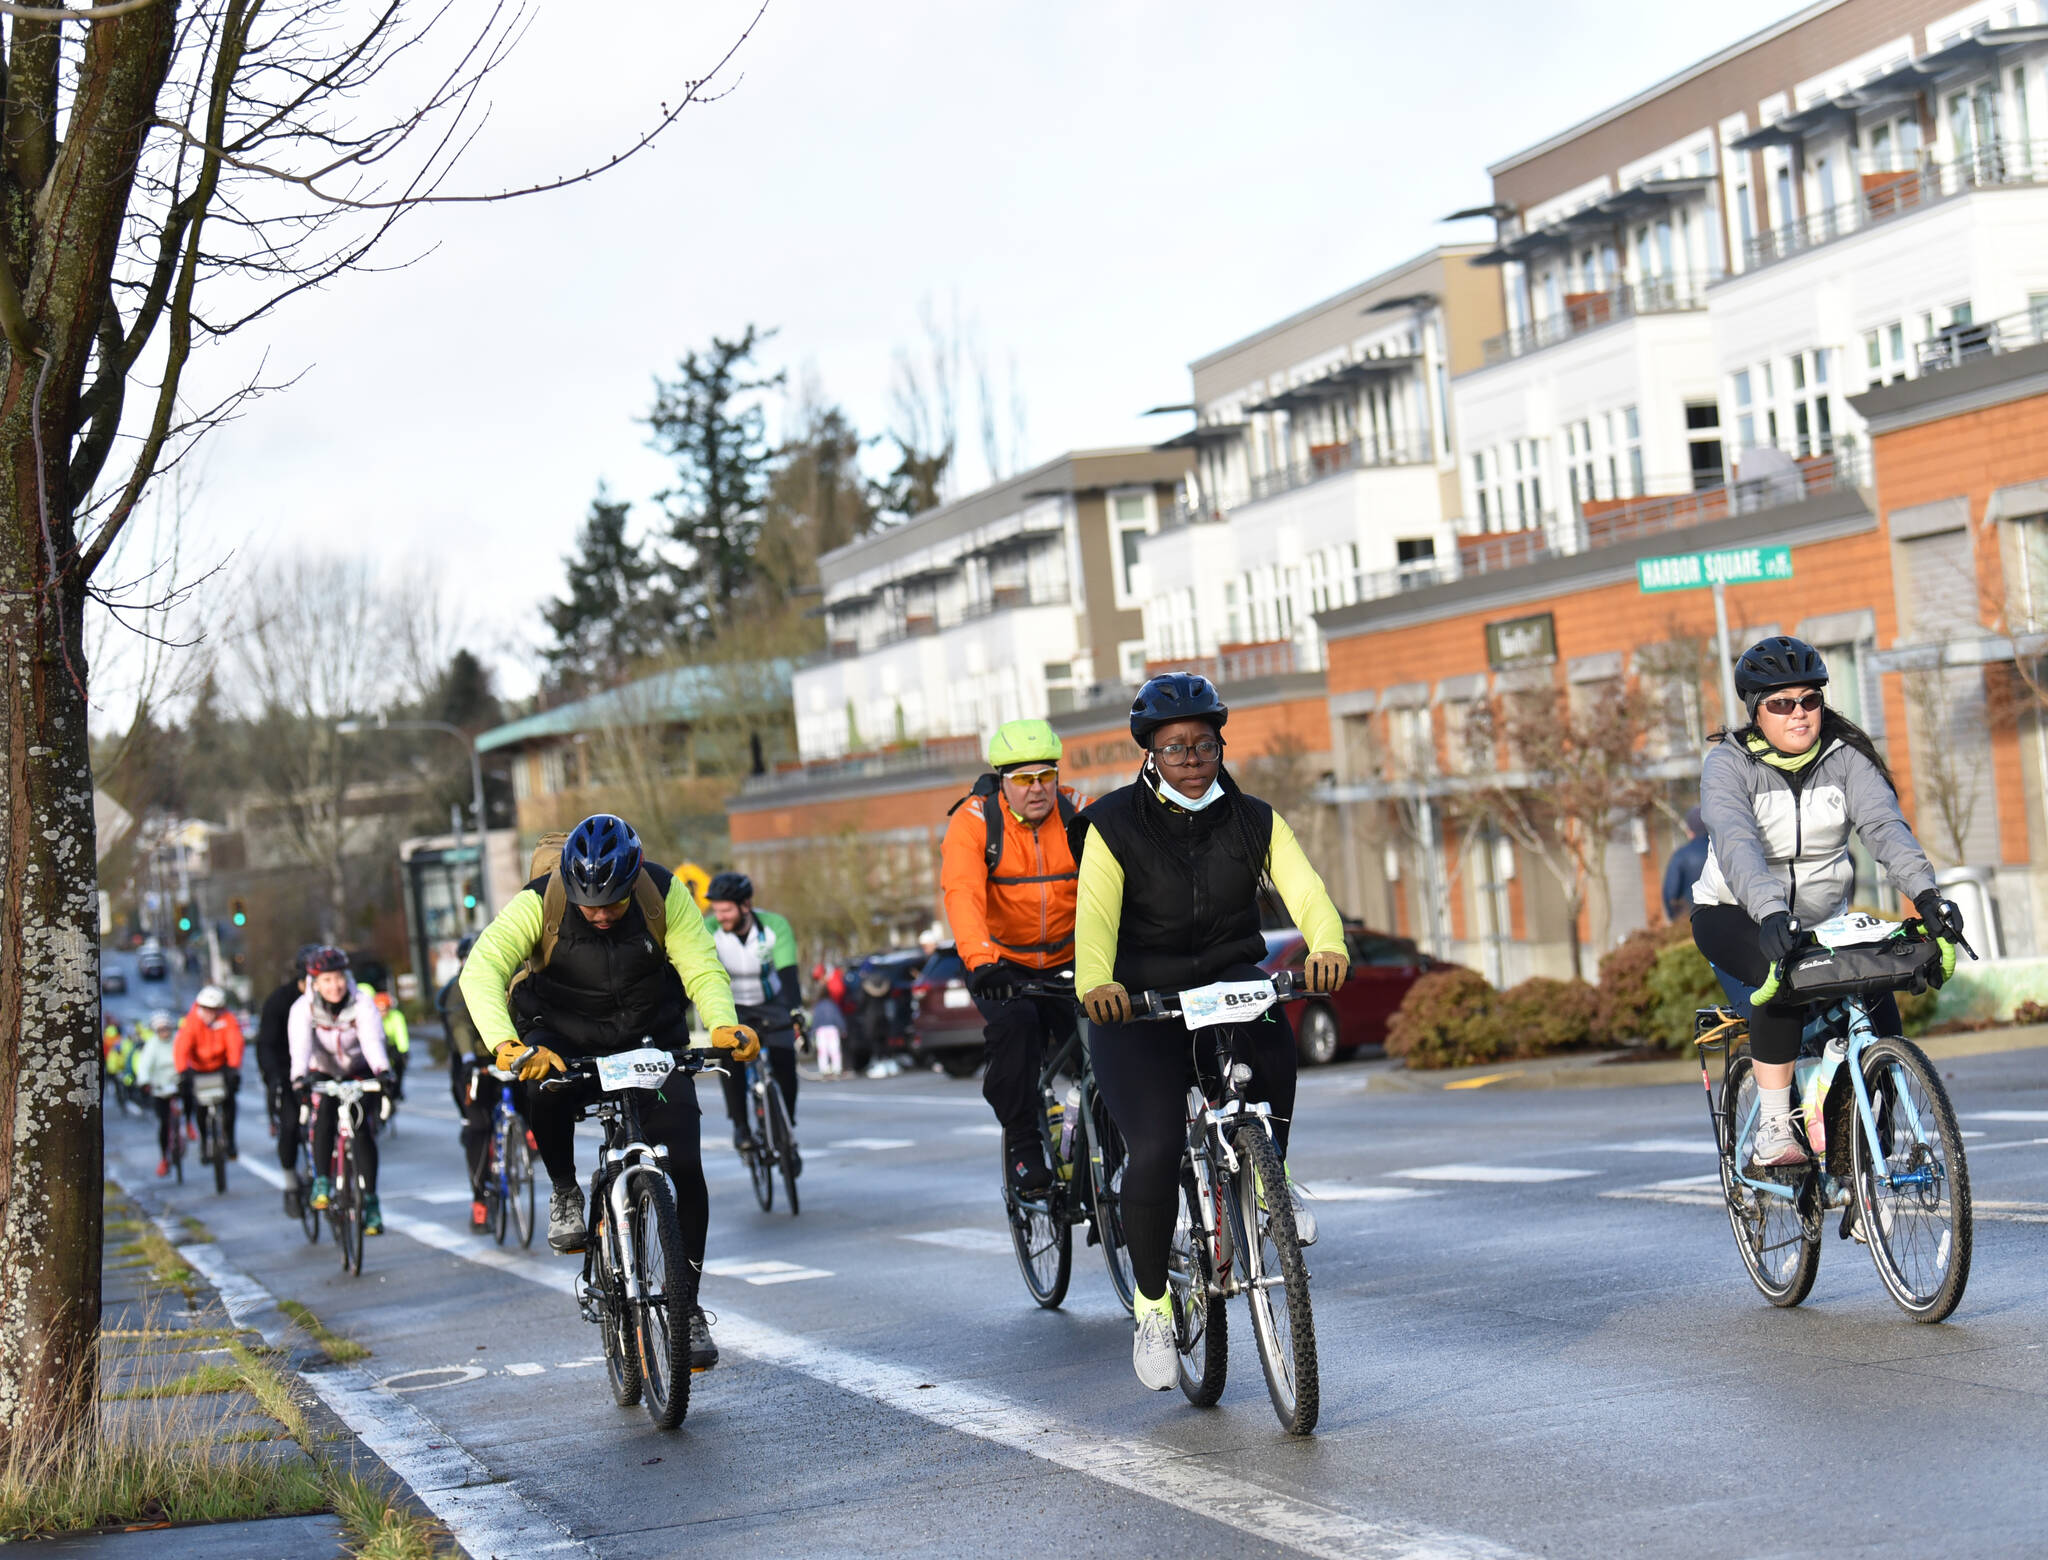 Chilly Hilly participants peddle up Winslow Way.